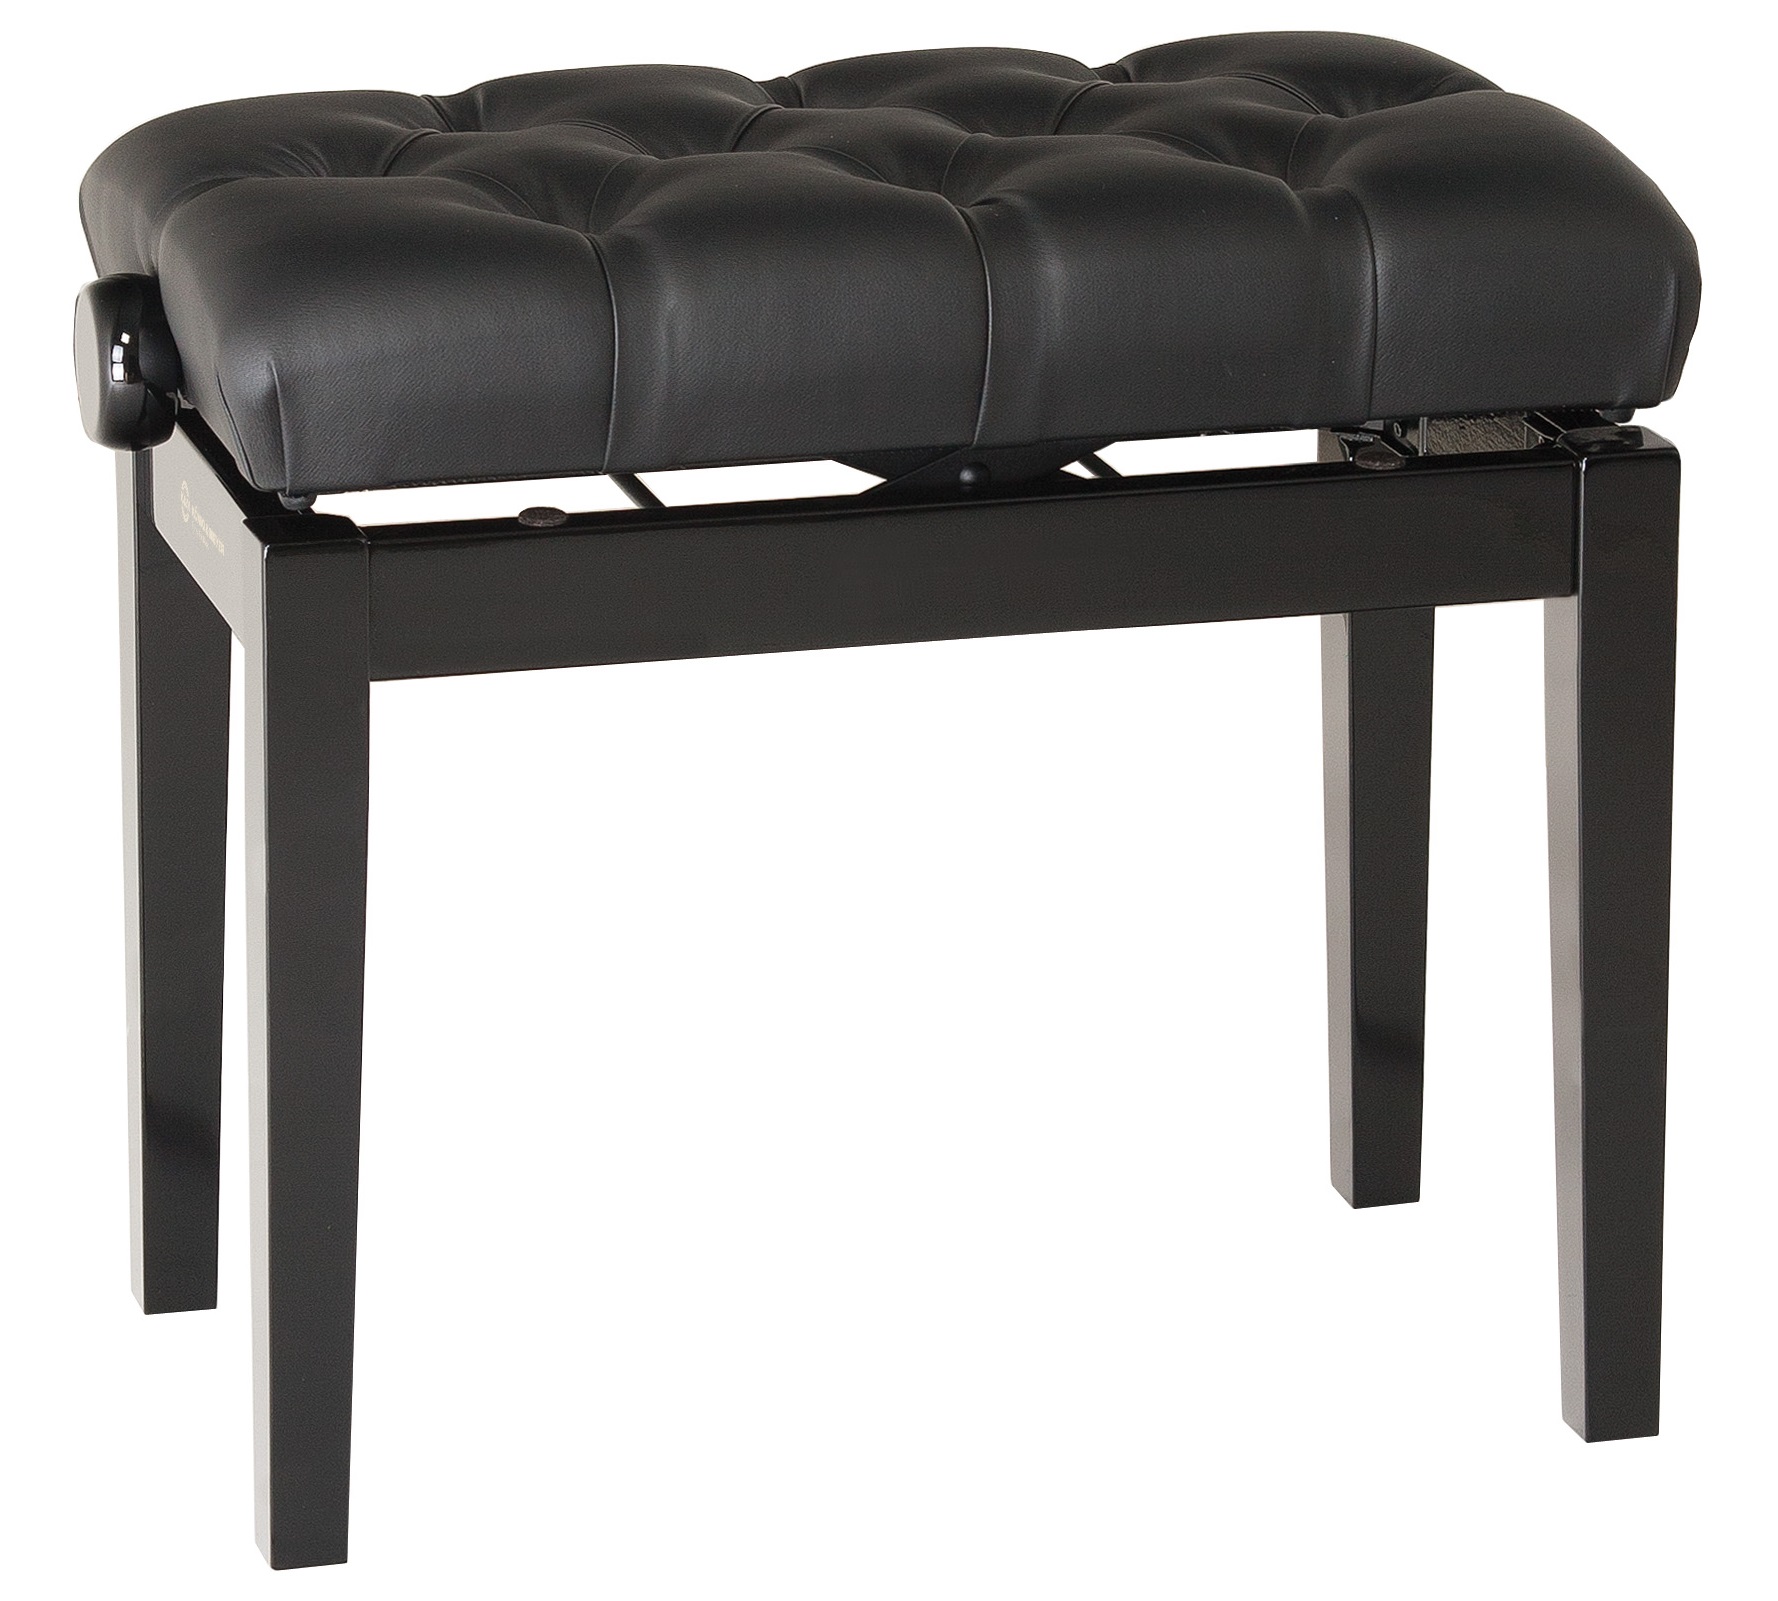 Fotografie Konig & Meyer Piano Bench With Quilted Seat Cushion, Black Leather Seat König & Meyer